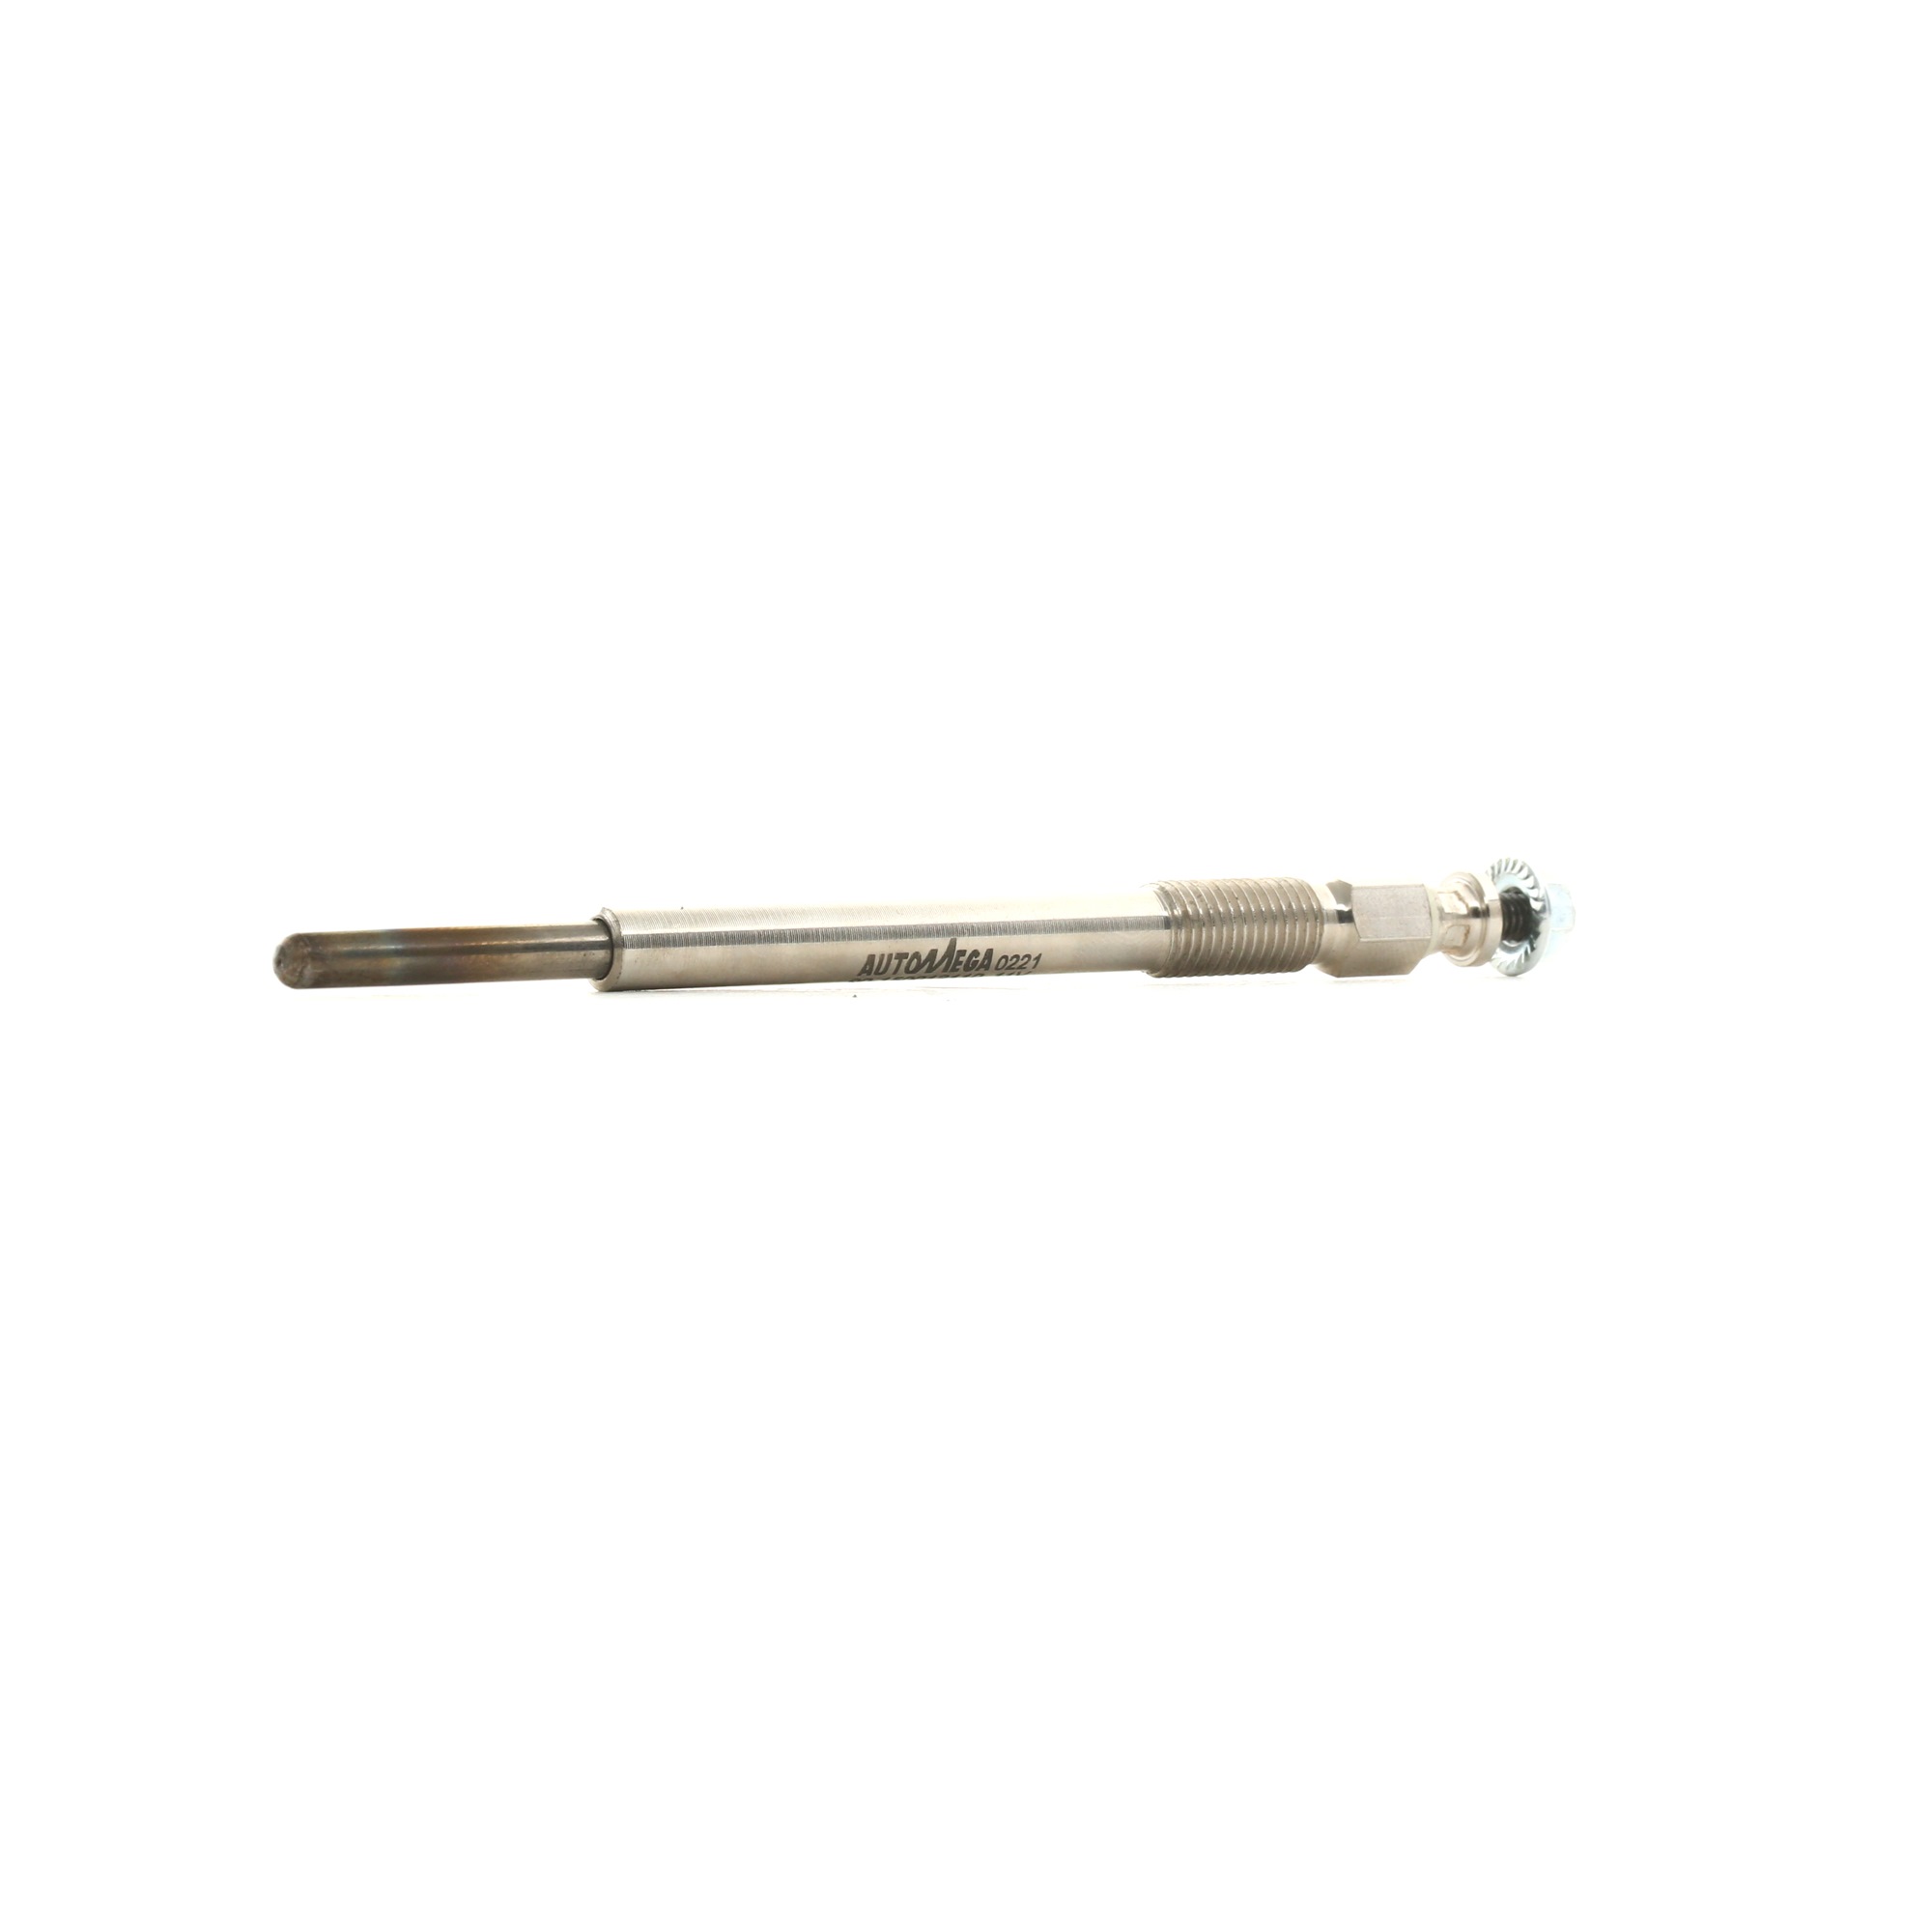 AUTOMEGA 11V M8x1,0, after-glow capable, Pencil-type Glow Plug, Length: 119 mm, 8 Nm Thread Size: M8x1,0 Glow plugs 150012110 buy